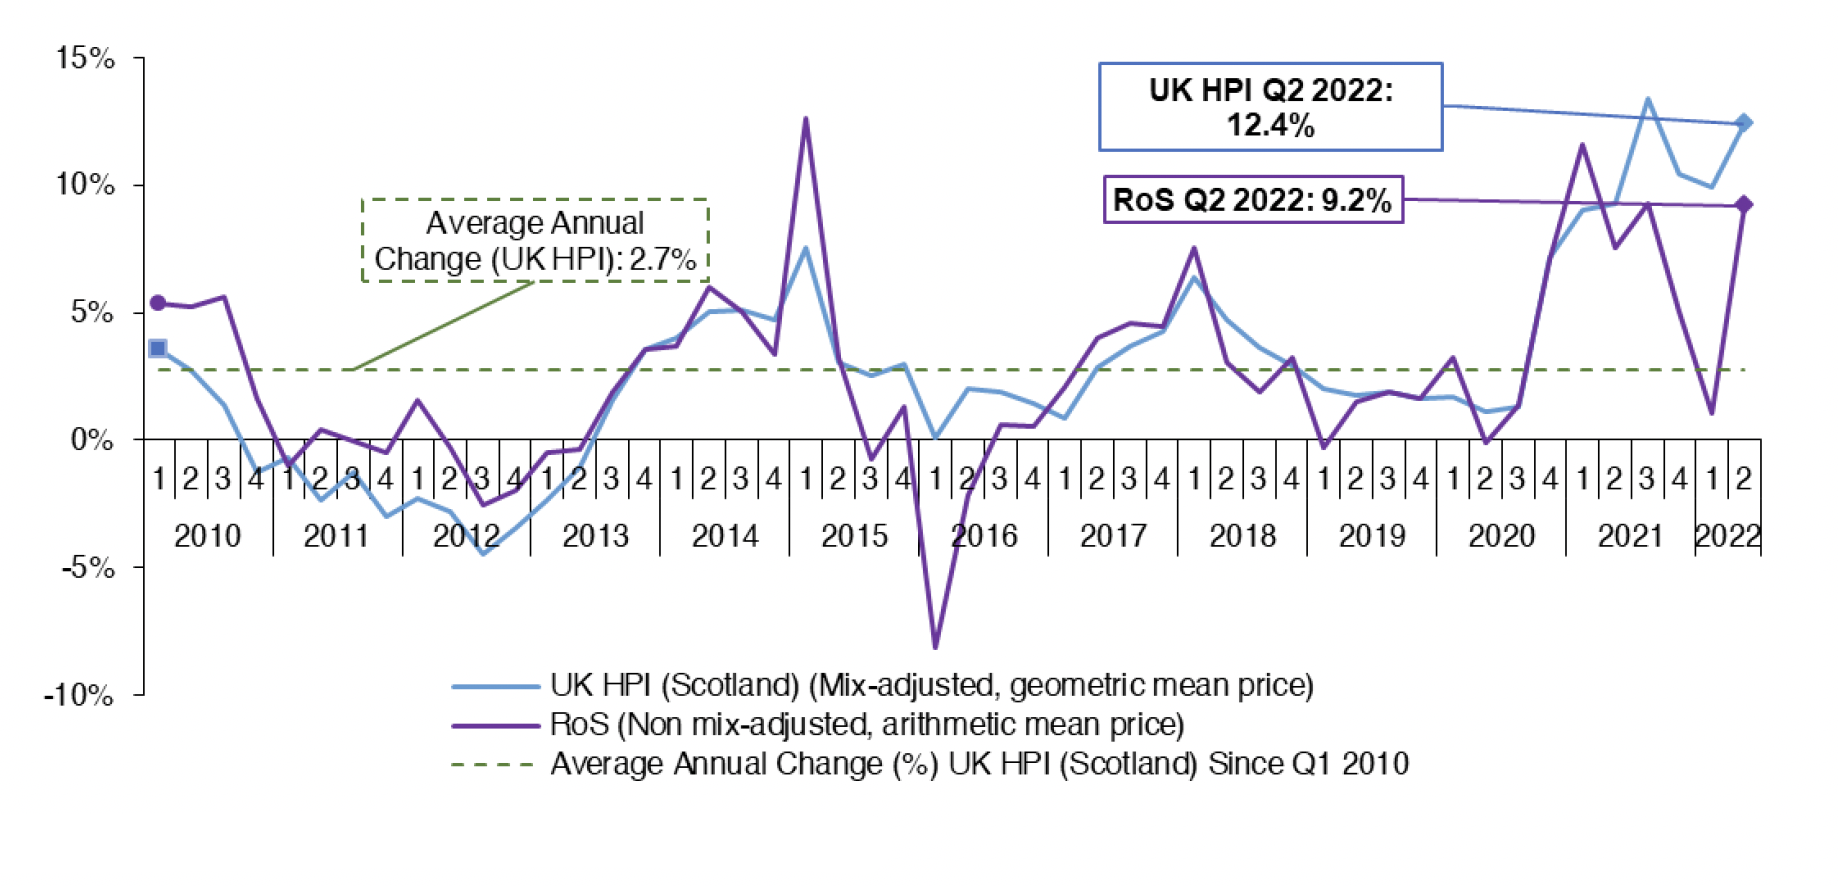 Chart 2.1 outlines the annual change in house prices on a quarterly basis. The average annual change in house prices (using UK HPI data) equals 2.7% from Q1 2010 to Q2 2022. 